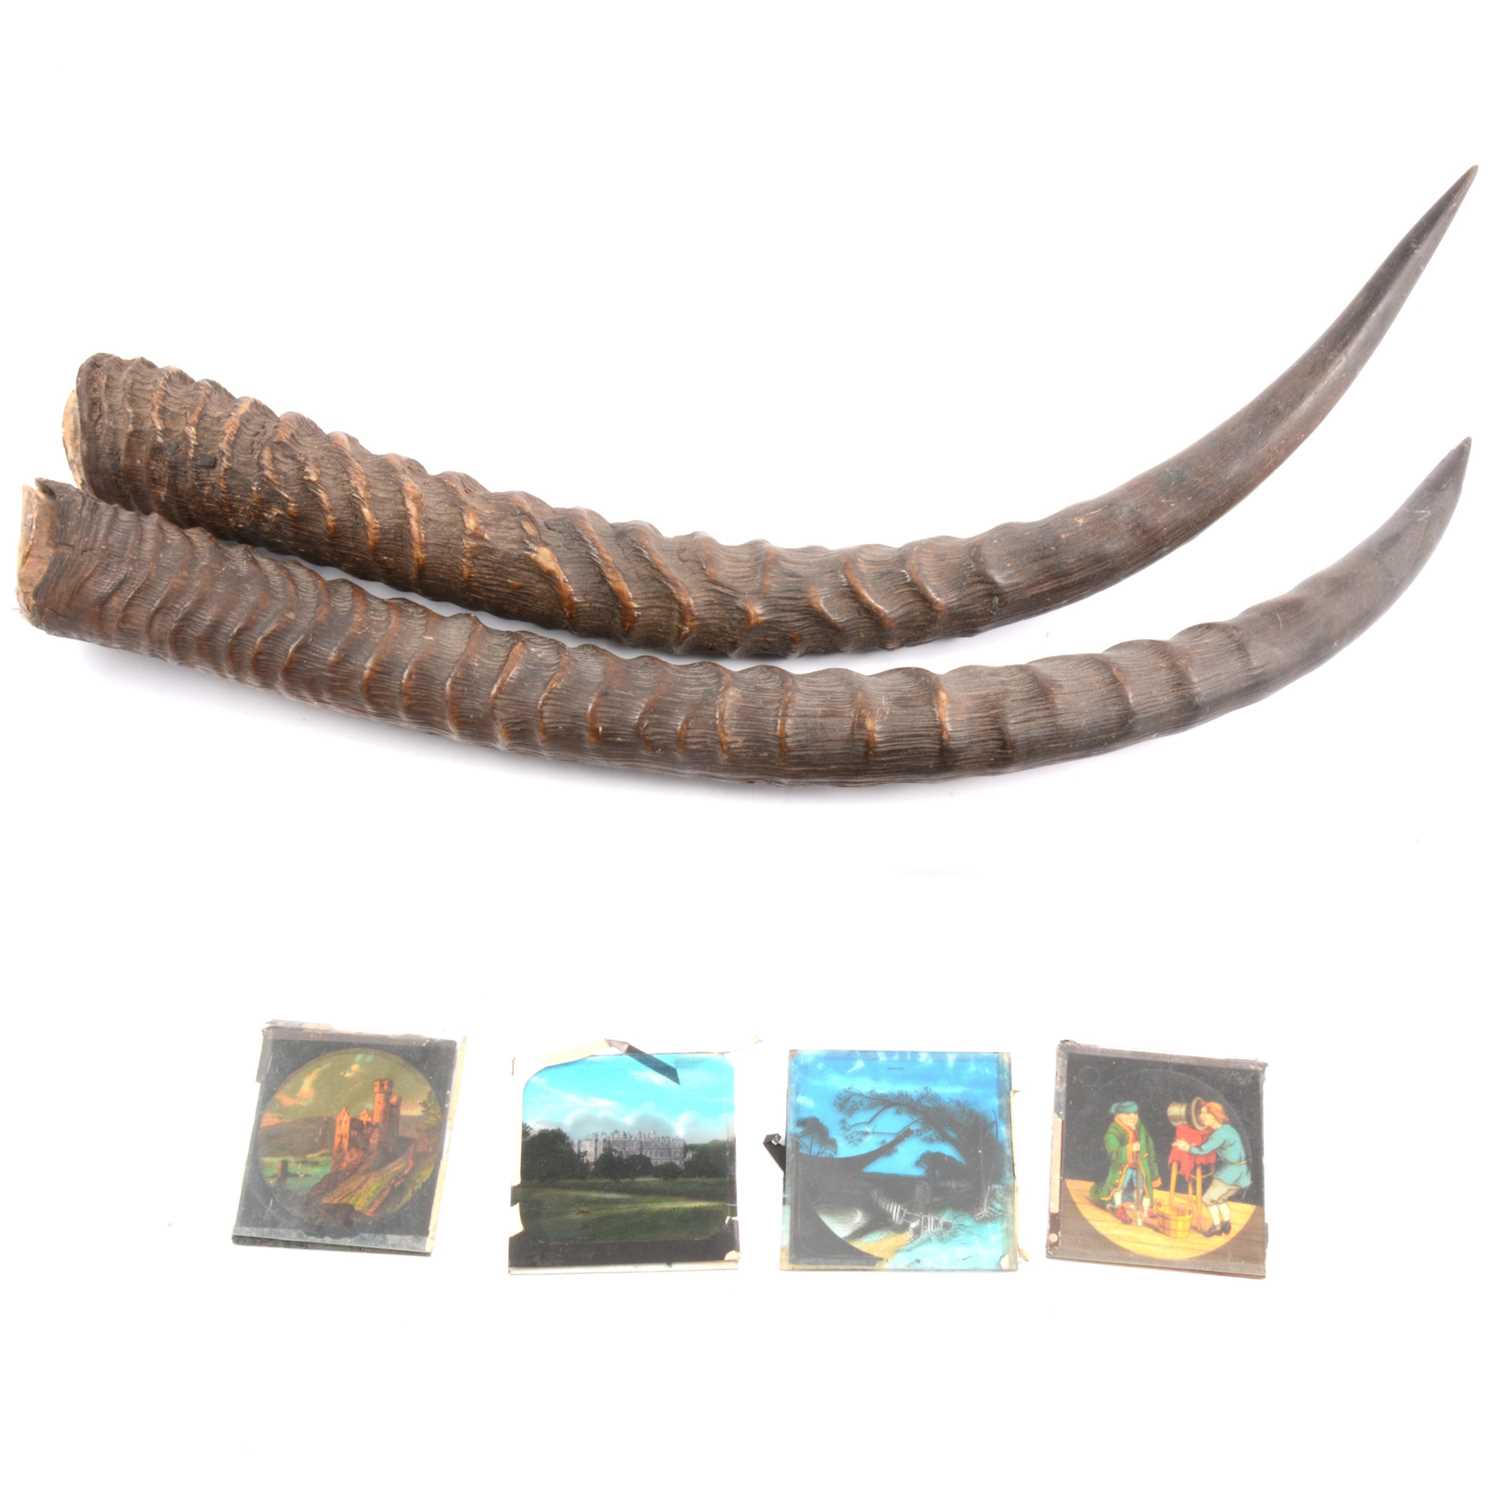 Lot 108 - Pair of un-mounted antelope horns, and miscellaneous lantern slides